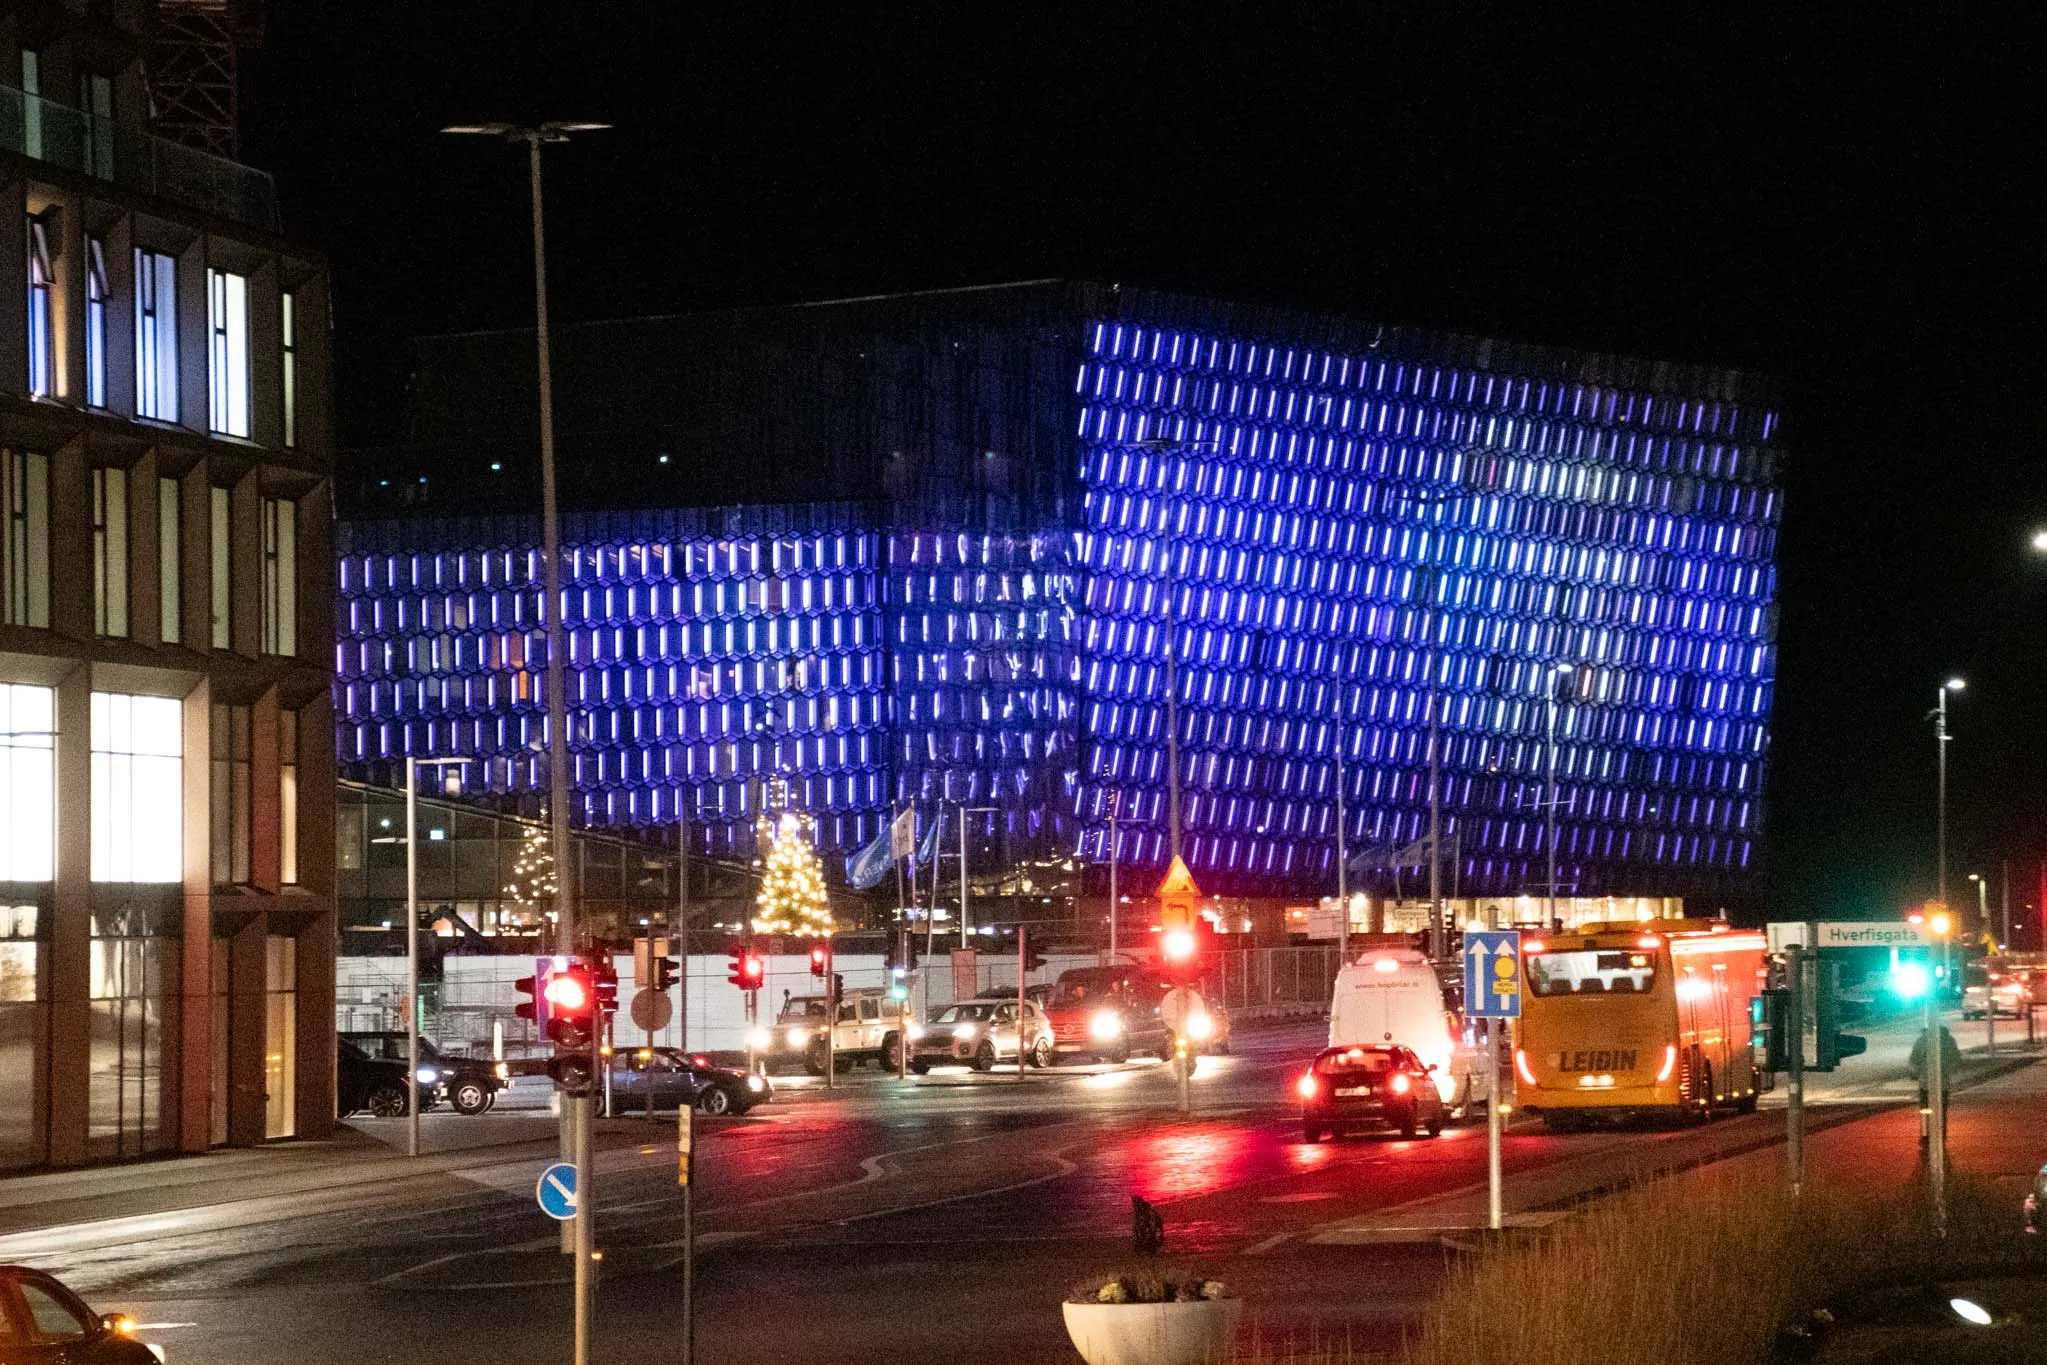 The beautiful Harpa building in Reykjavik at night illuminated in blue